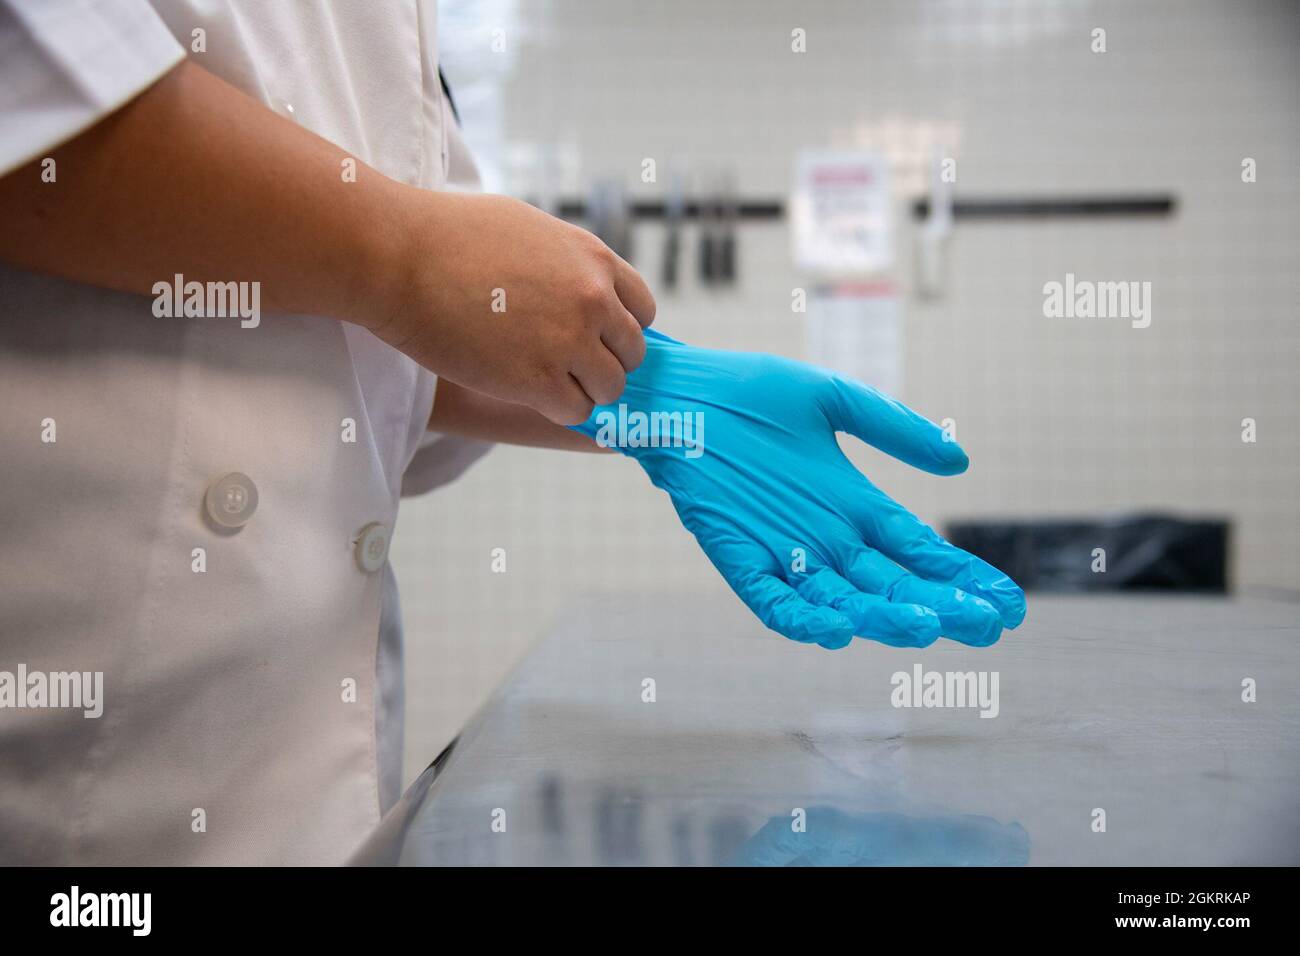 U.S. Air Force Senior Airman Haley Garces, 6th Force Support Squadron food services journeyman, dons a pair of gloves at MacDill Air Force Base, Florida, June 15, 2021. Garces used proper health precautions ensuring that she didn’t contaminate any of the food she prepared. Stock Photo